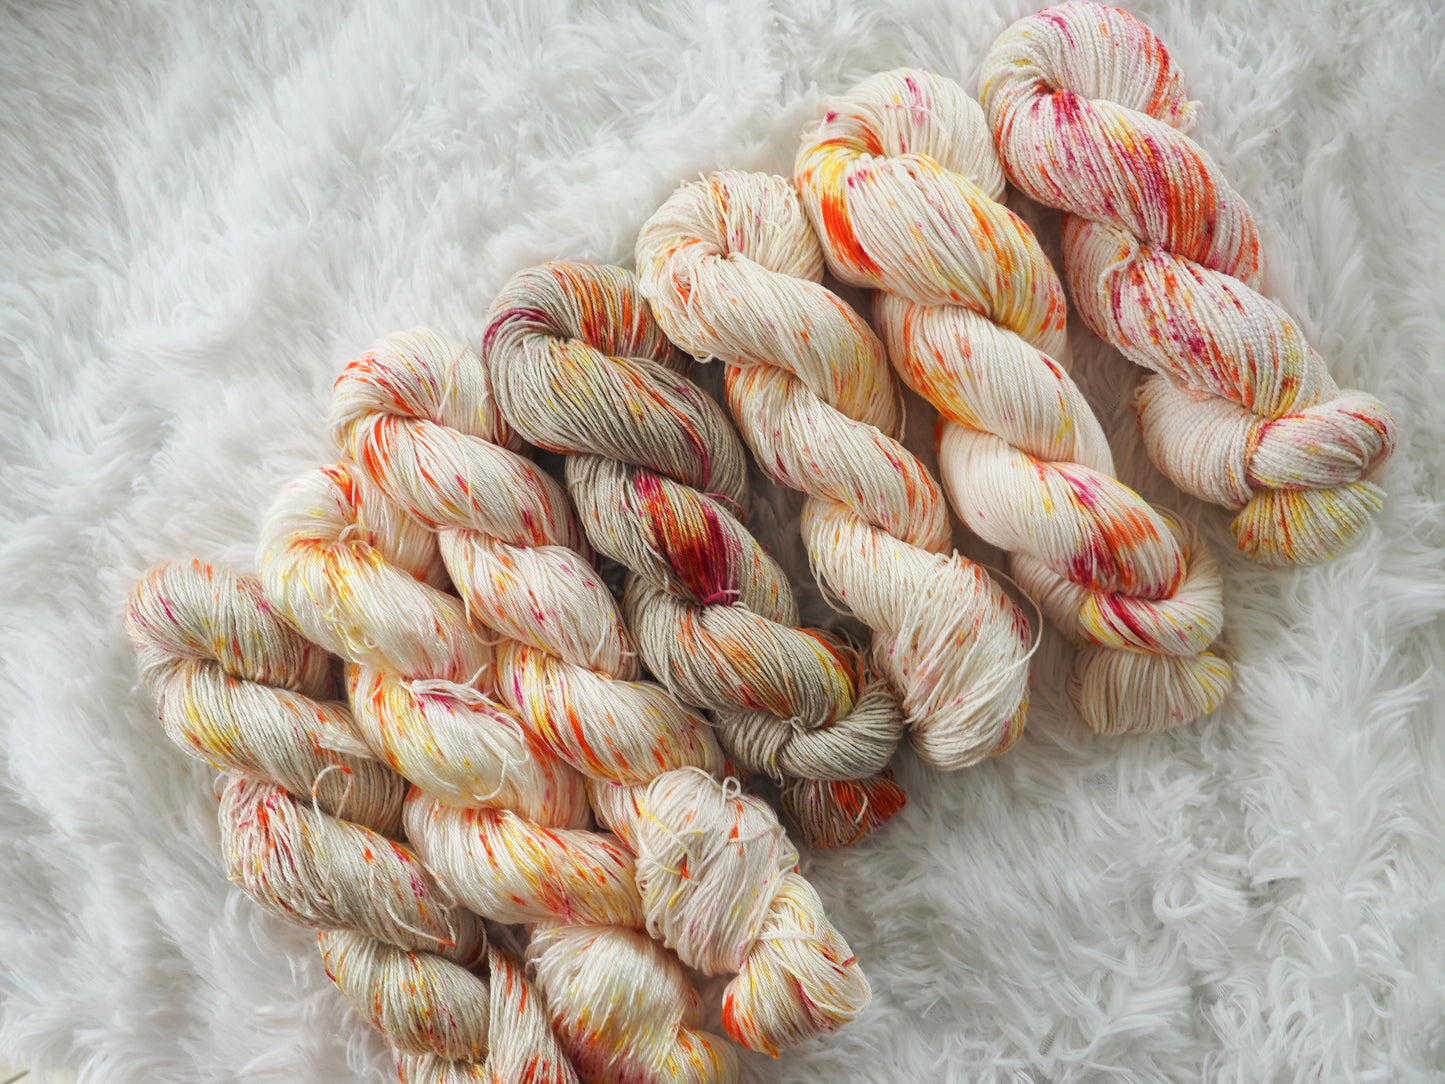 Georgia Peach - Dyed to Order *Please allow 3-4 weeks for dyeing*